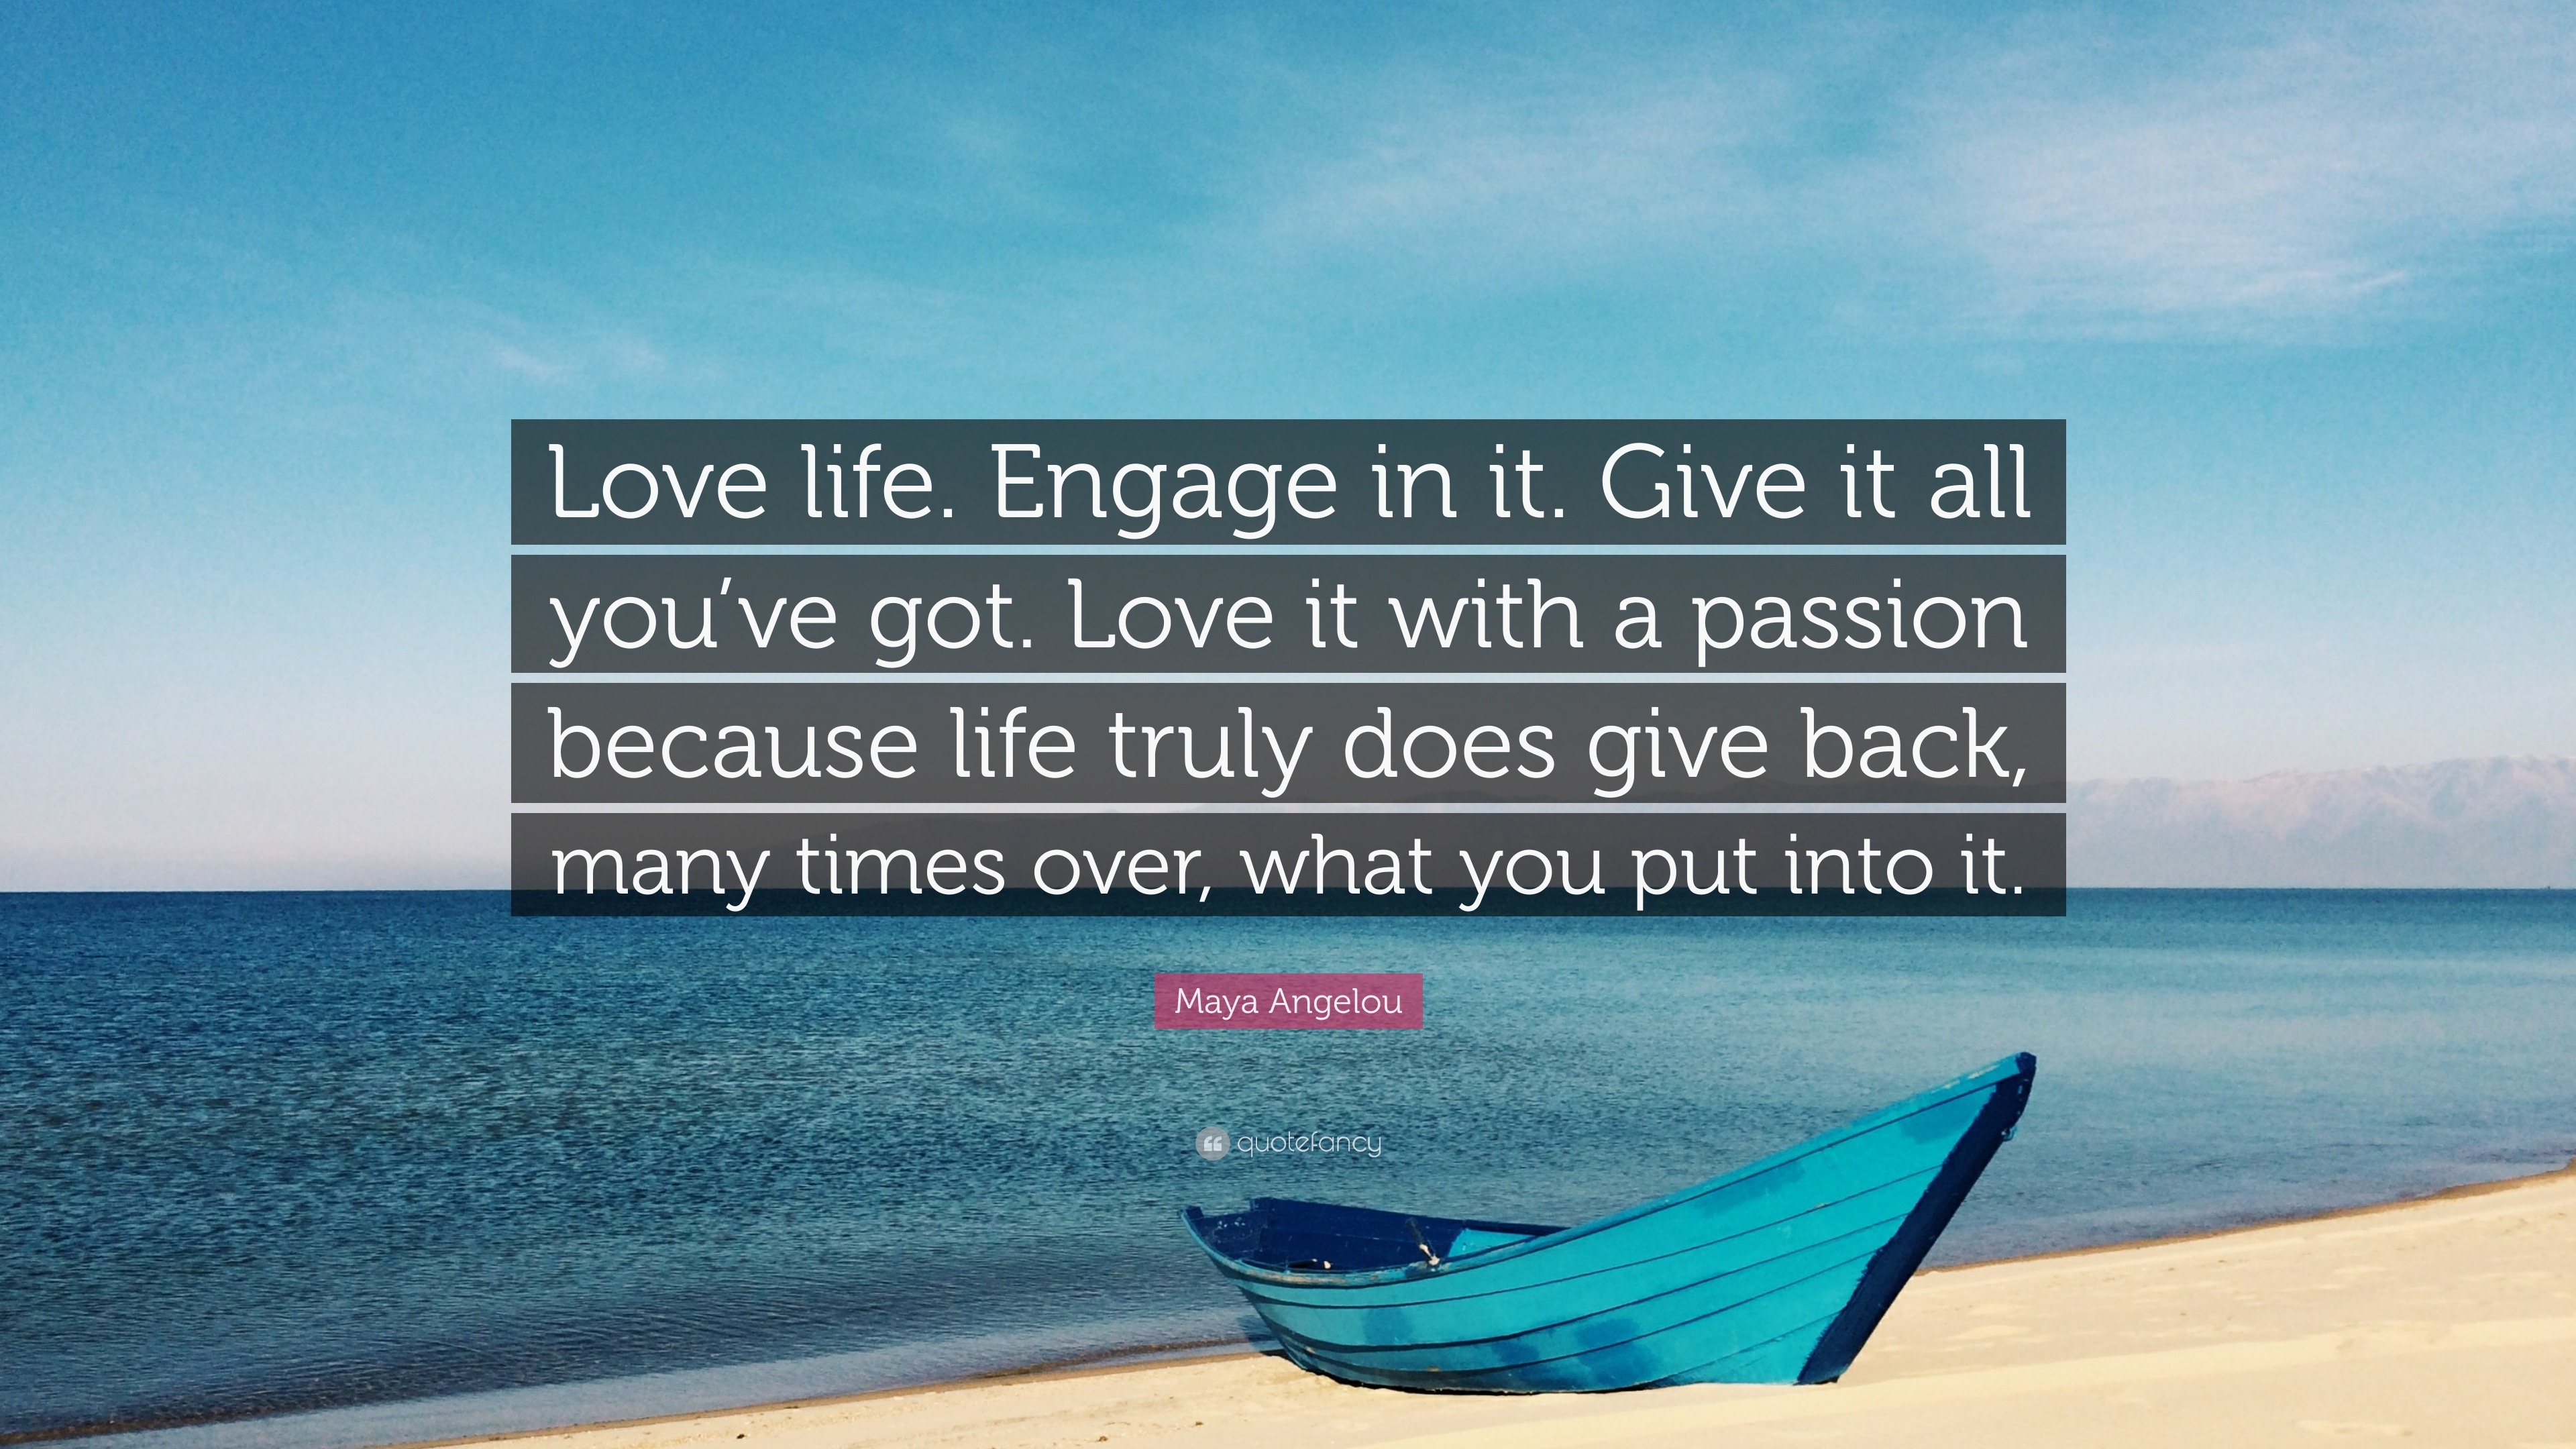 Maya Angelou Quote: "Love life. Engage in it. Give it all you've got. Love it with a passion ...